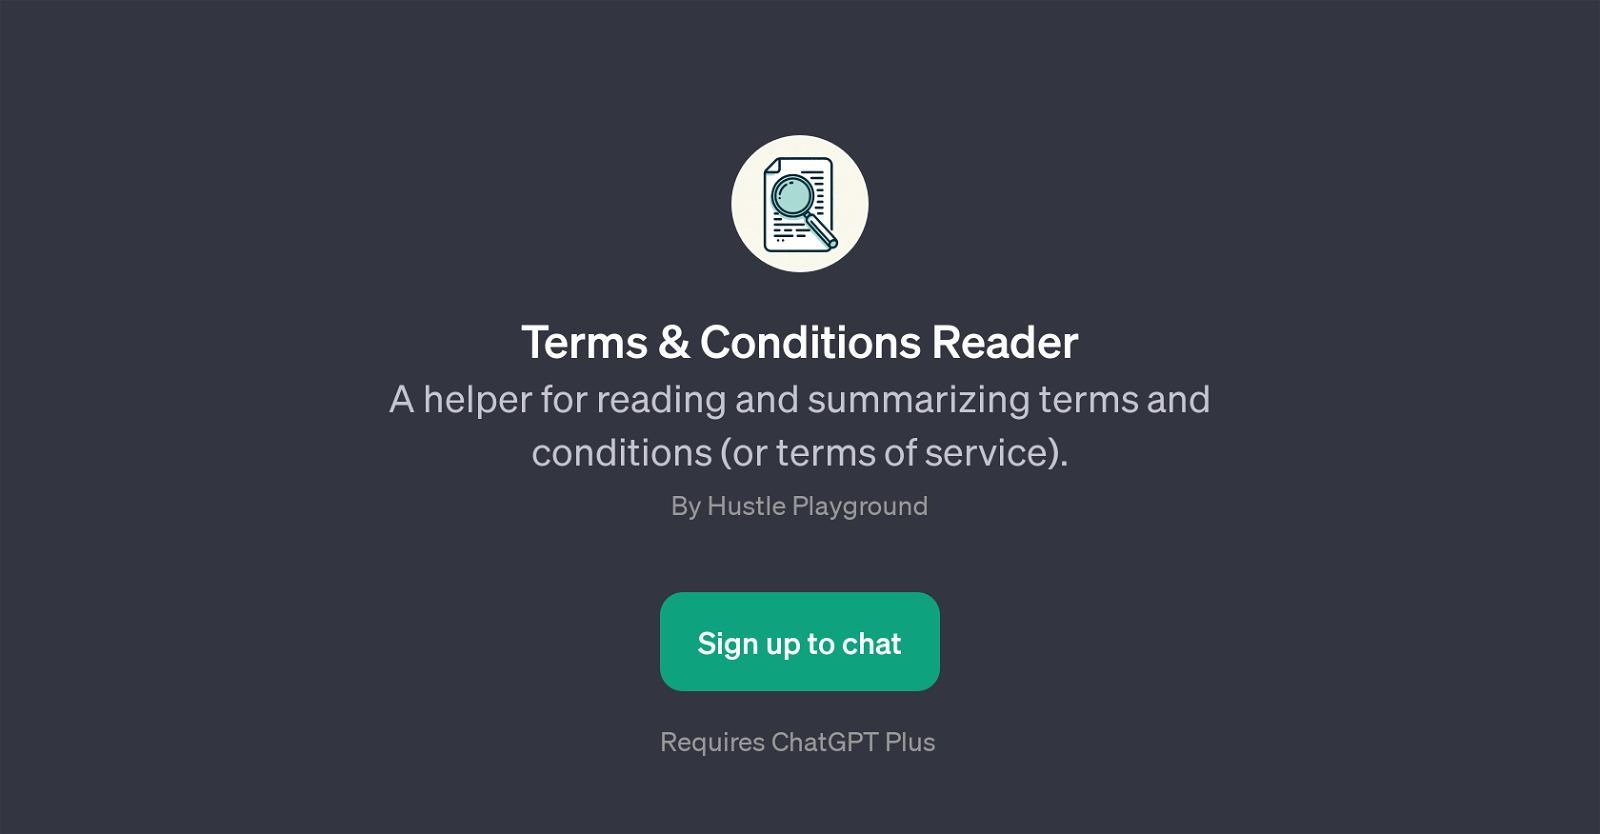 Terms & Conditions Reader website